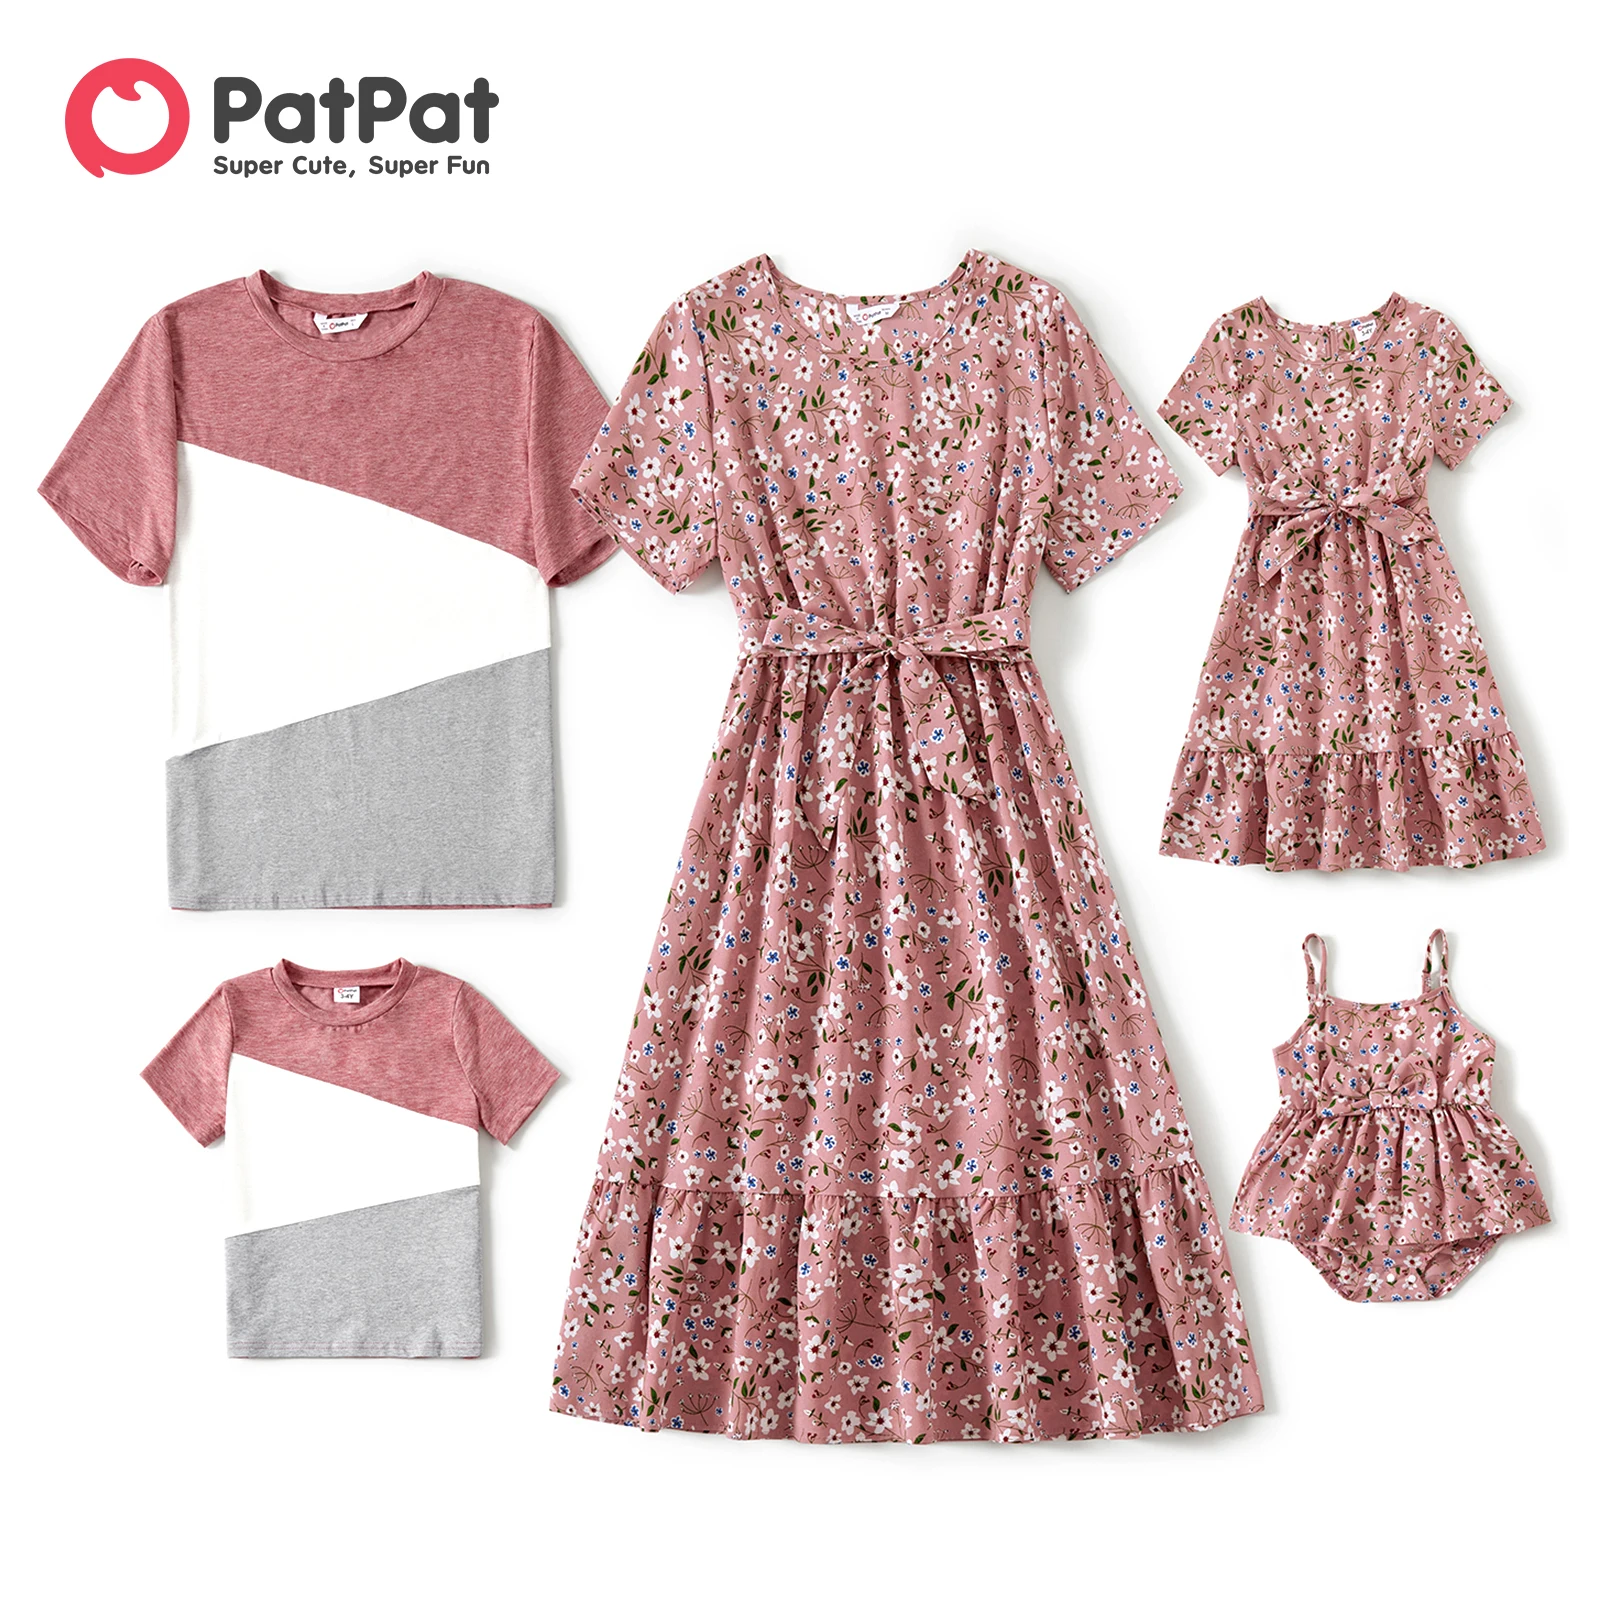 

PatPat Family Matching Outfits Allover Floral Print Short-sleeve Belted Dresses and Colorblock T-shirts Family Looks Sets